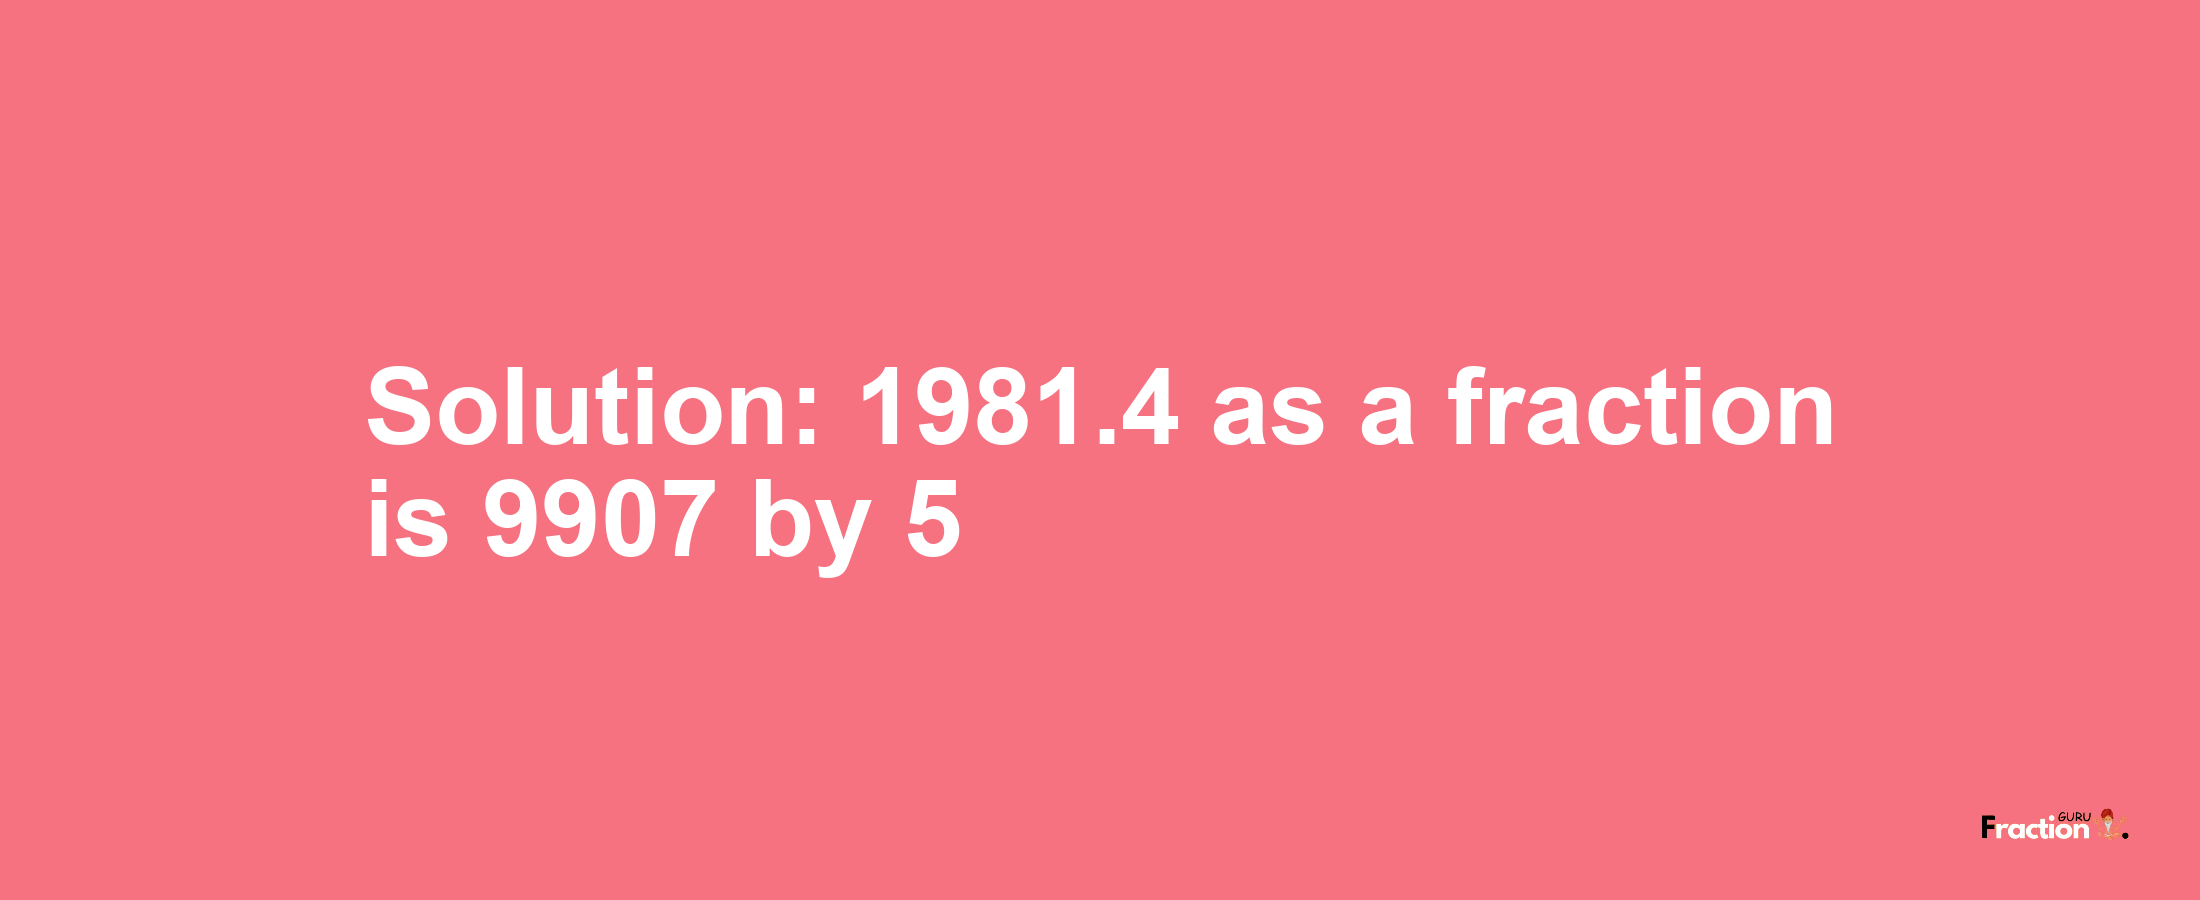 Solution:1981.4 as a fraction is 9907/5